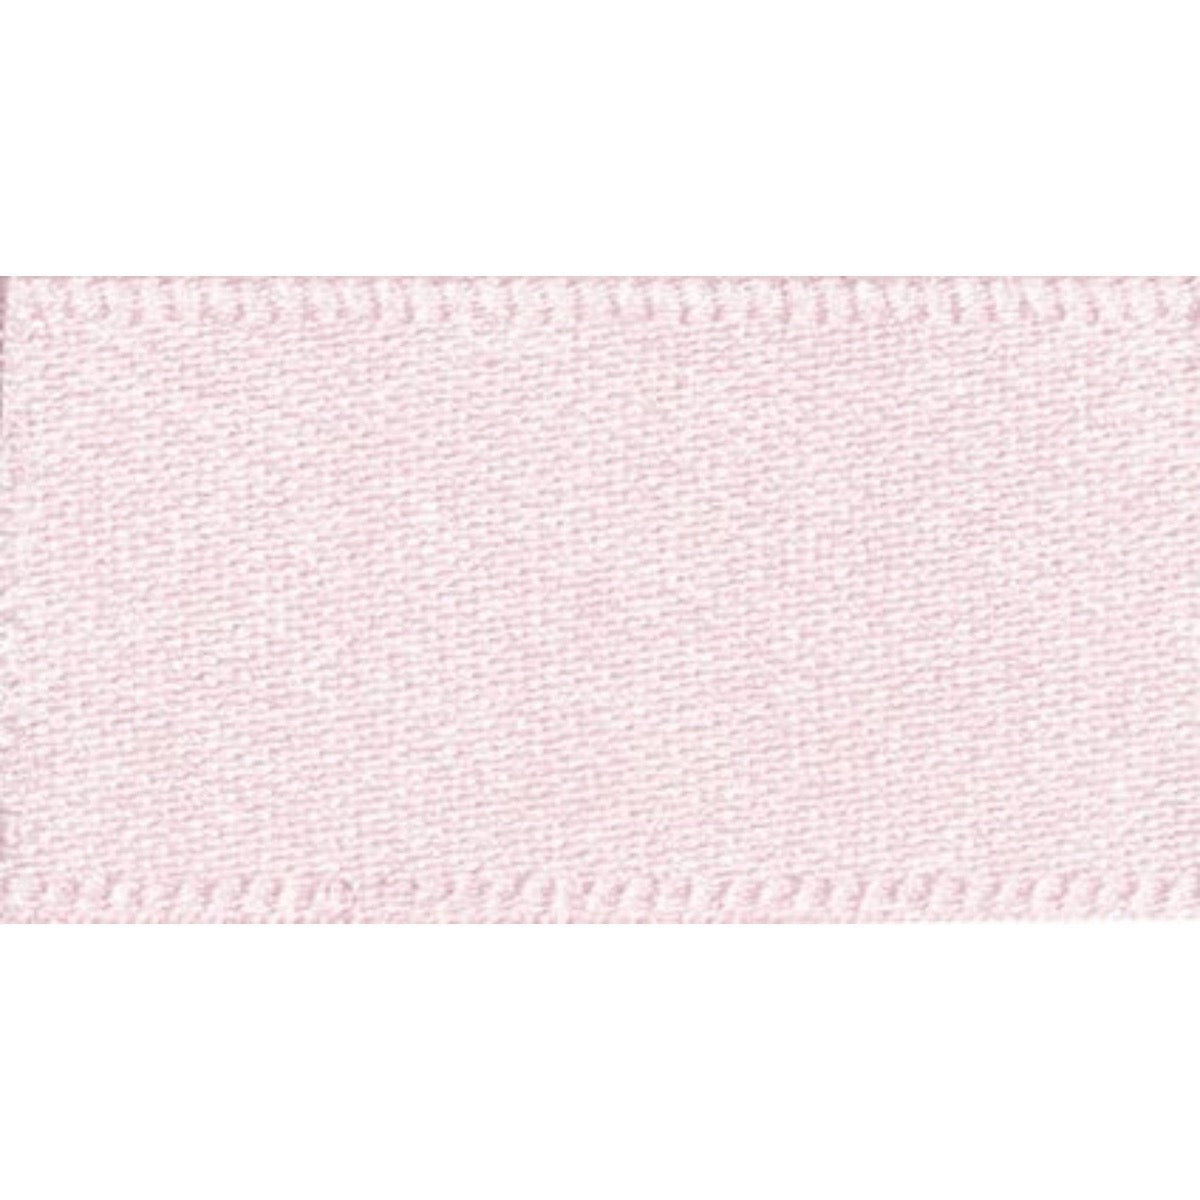 Double Faced Satin Ribbon Pale Pink: 15mm wide. Price per metre.